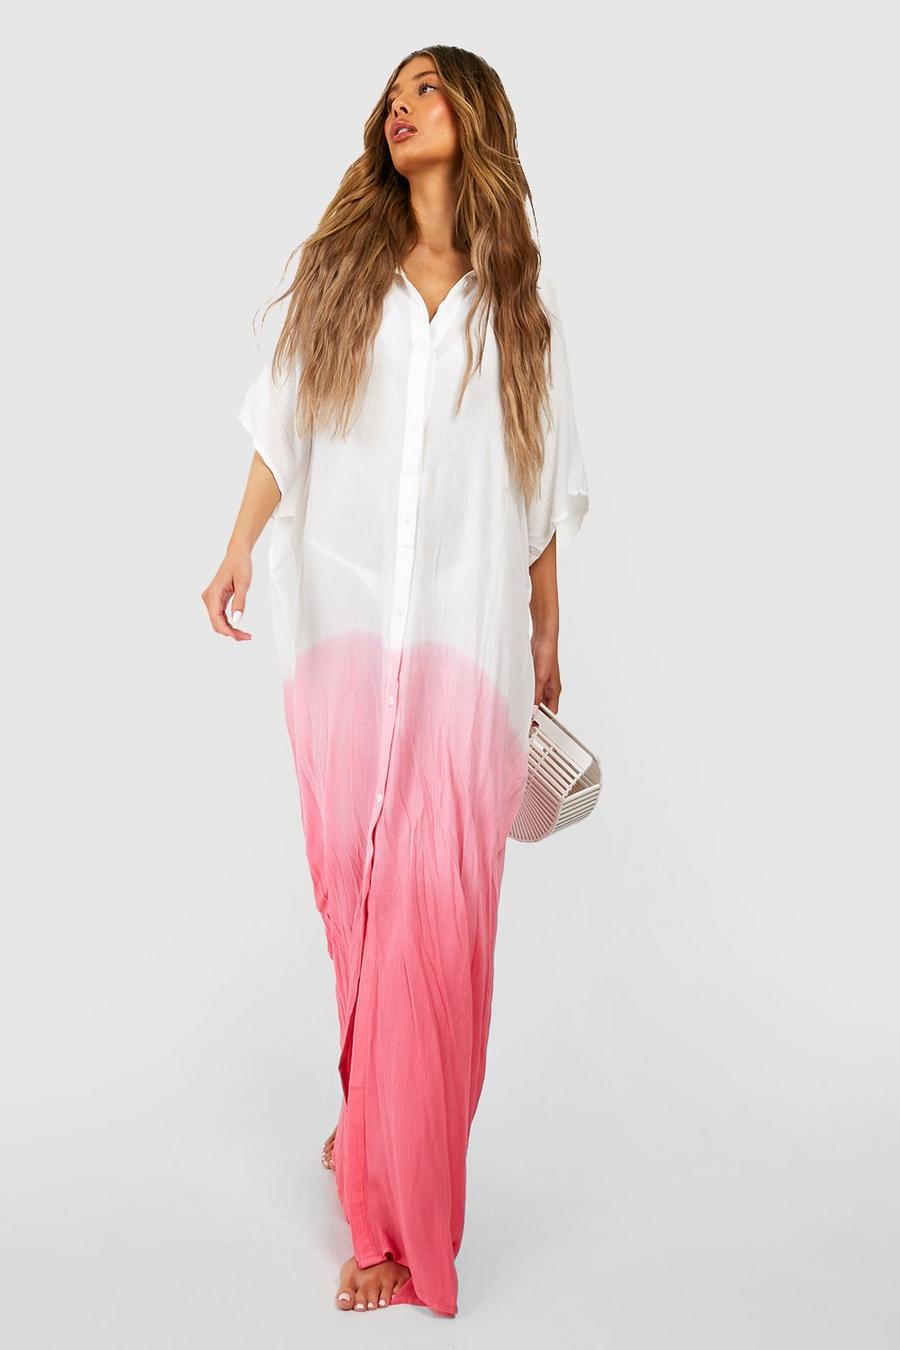 Pink Crinkle Ombre Maxi Cover Up Beach Kimono